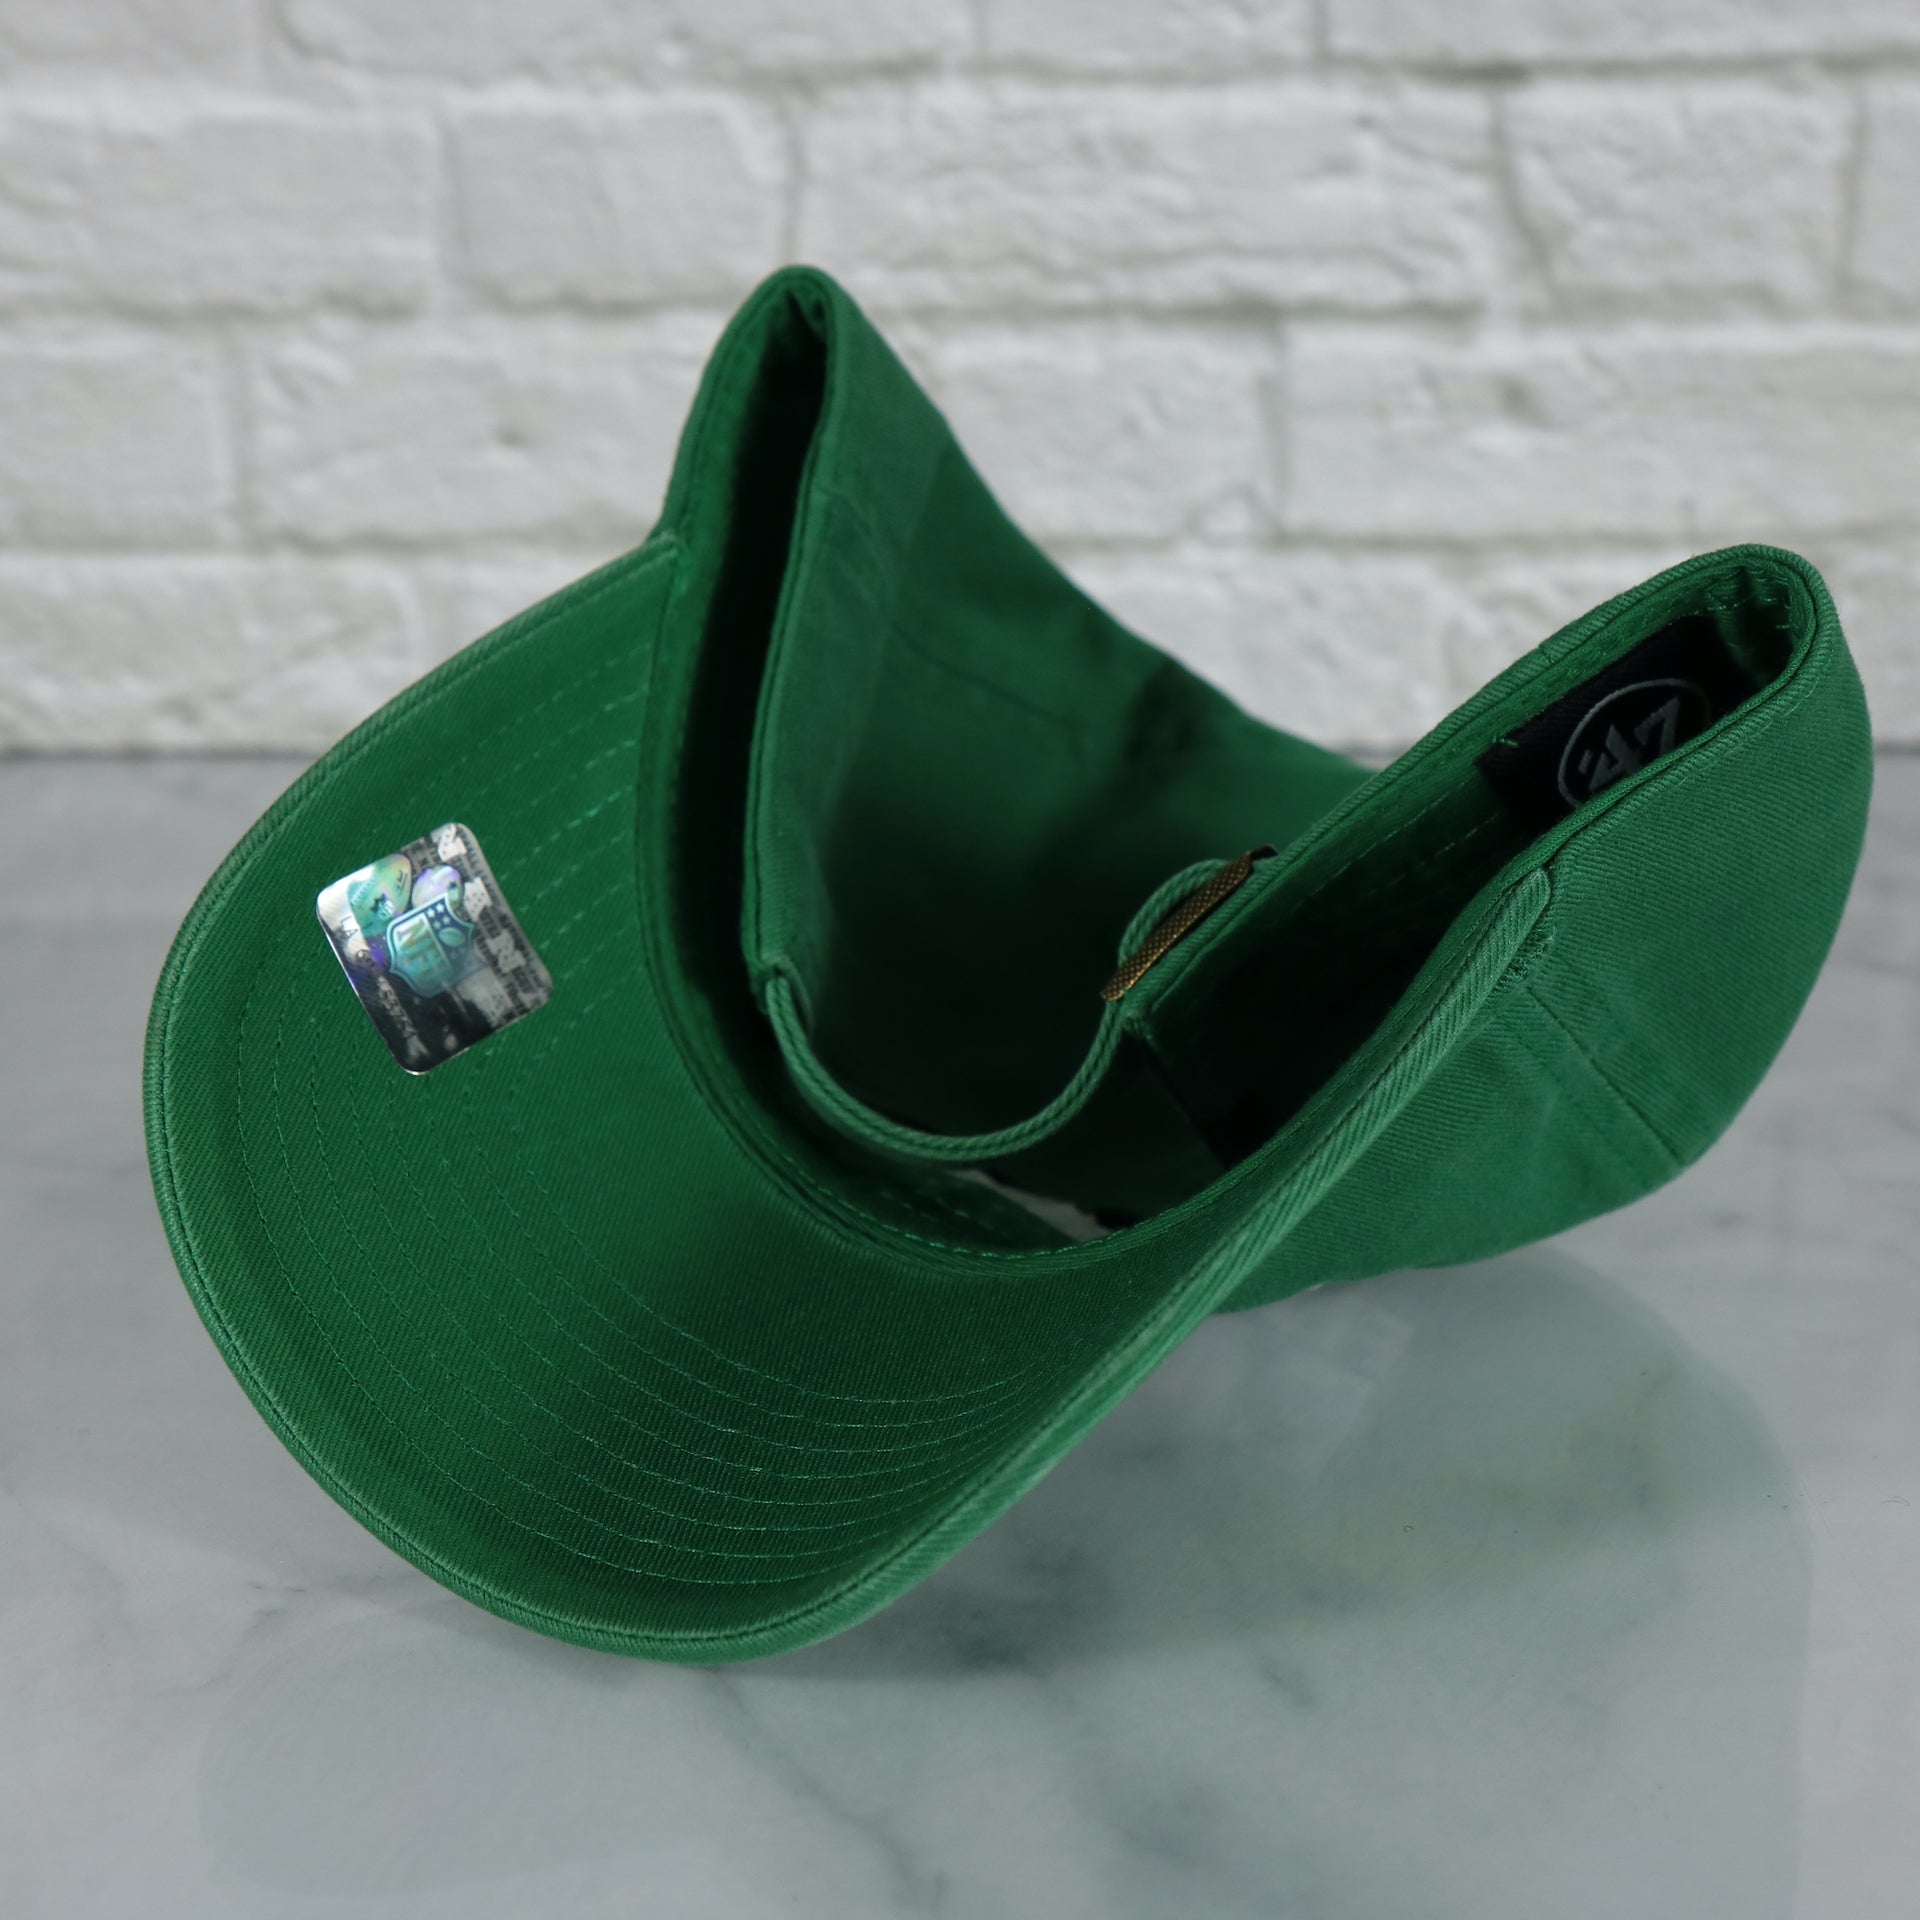 Kelly green undervisor on the Philadelphia Eagles Throwback Logo "Fly Eagles Fly" Kelly Green Retro Clean Up Dad Hat